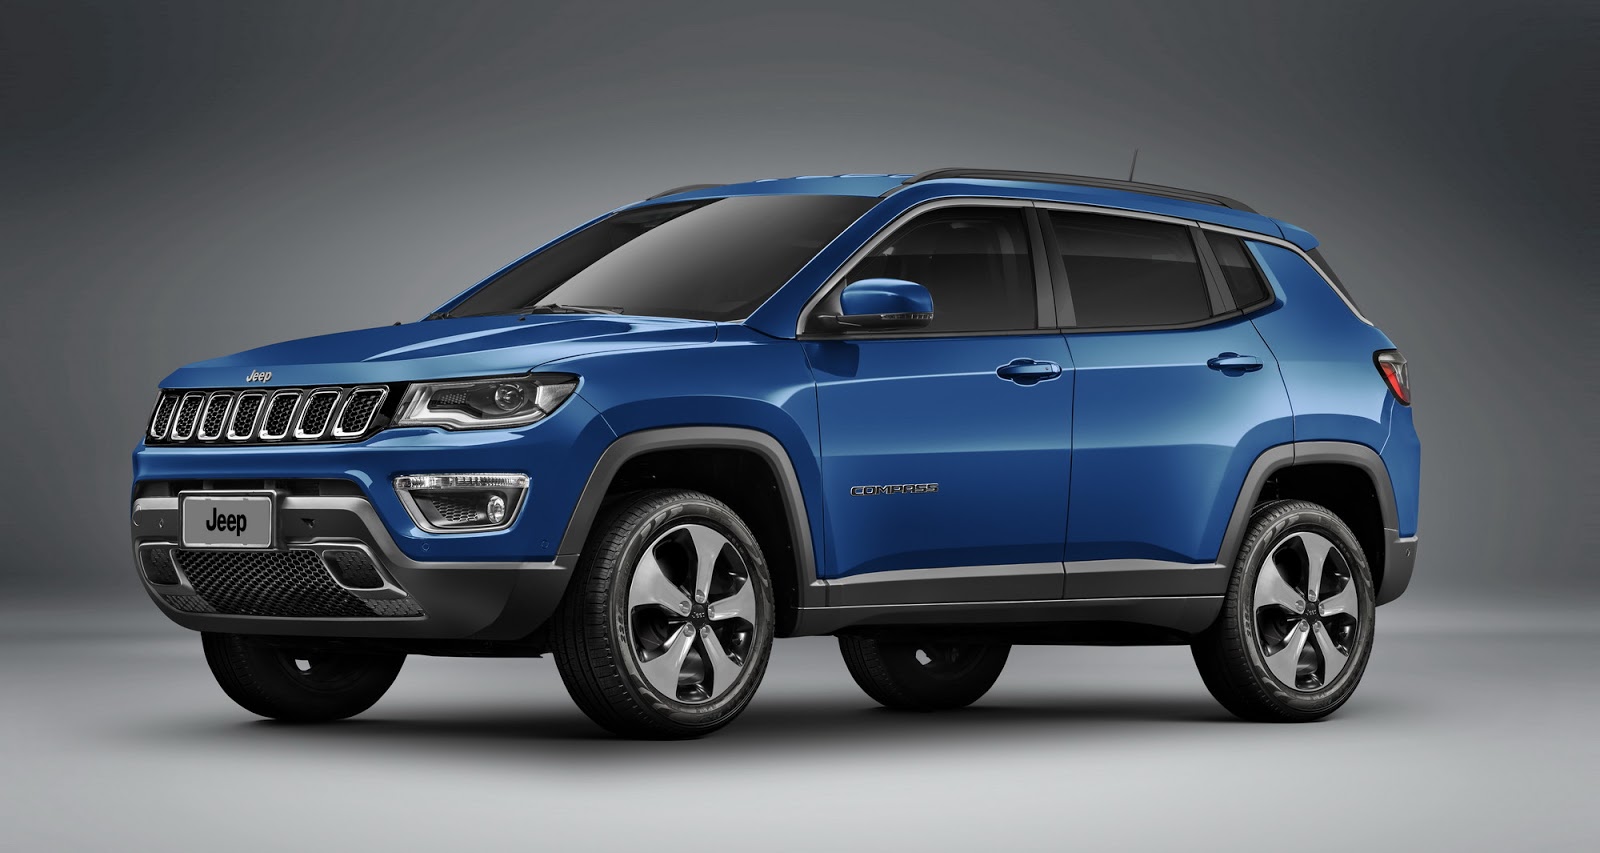 Eurospec 2017 Jeep Compass Detailed, Priced From €24,900